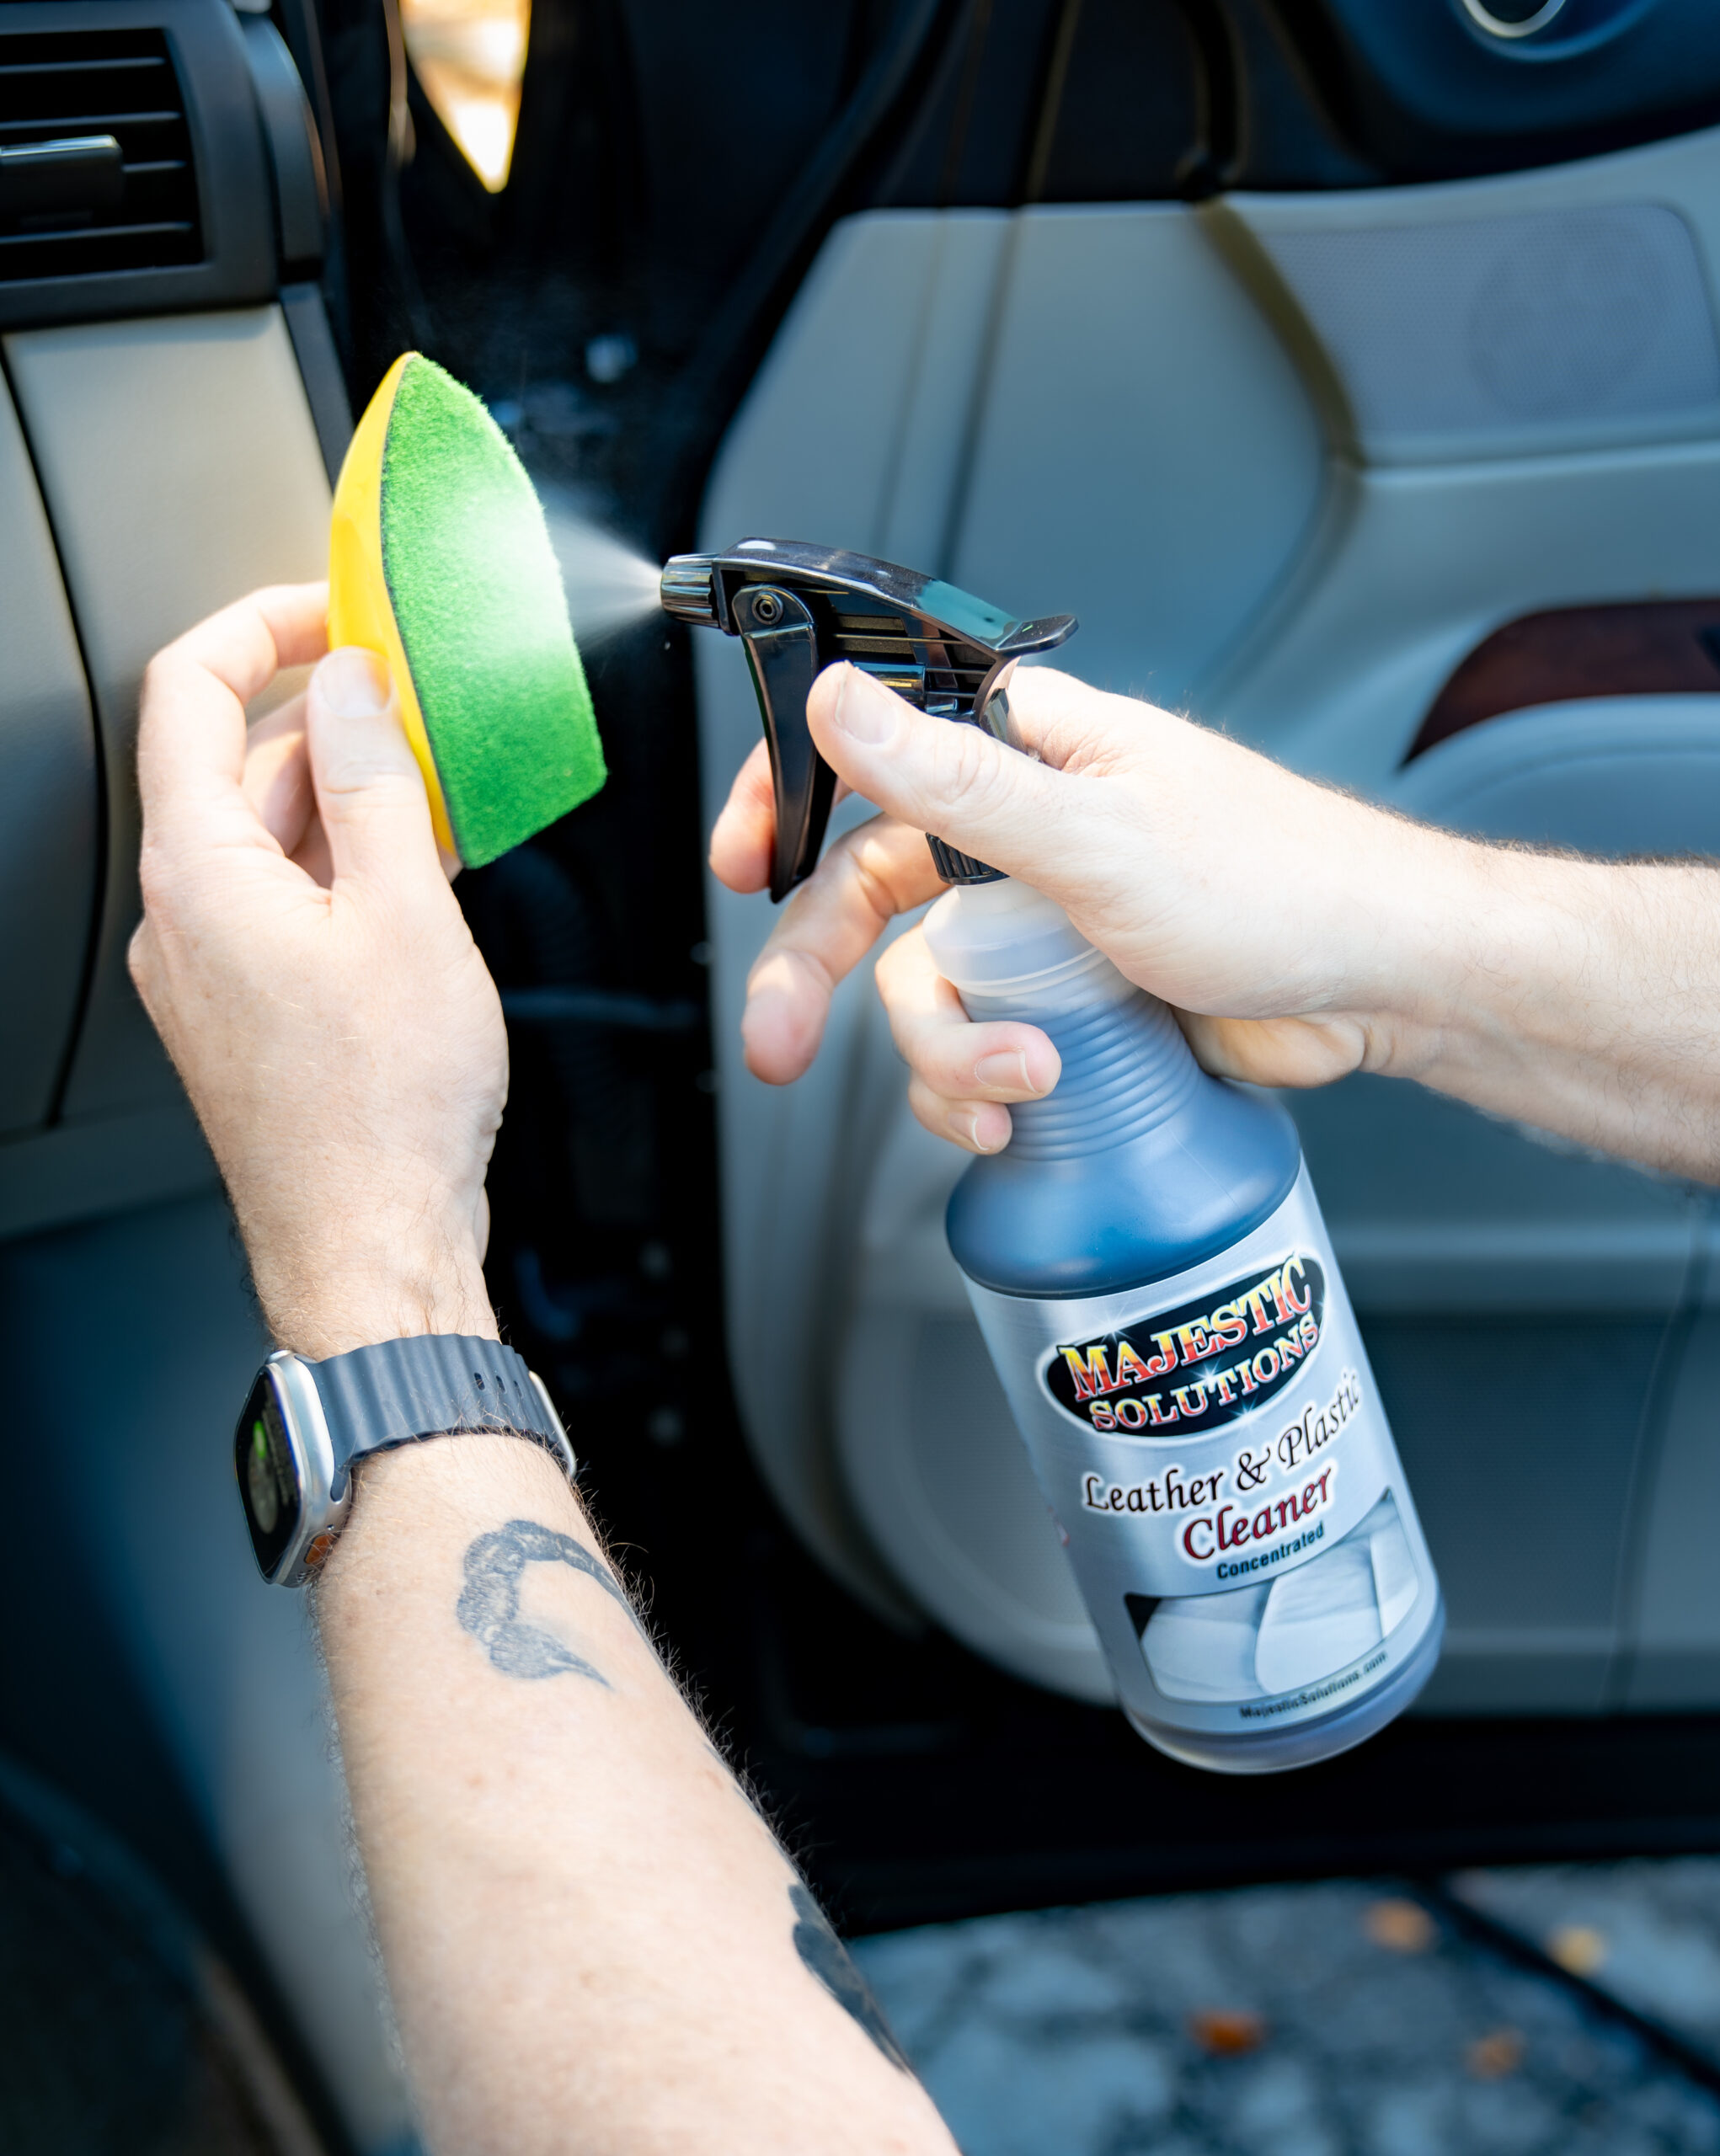 GLASS CLEANER AEROSOL - Majestic Solutions Auto Detail Products